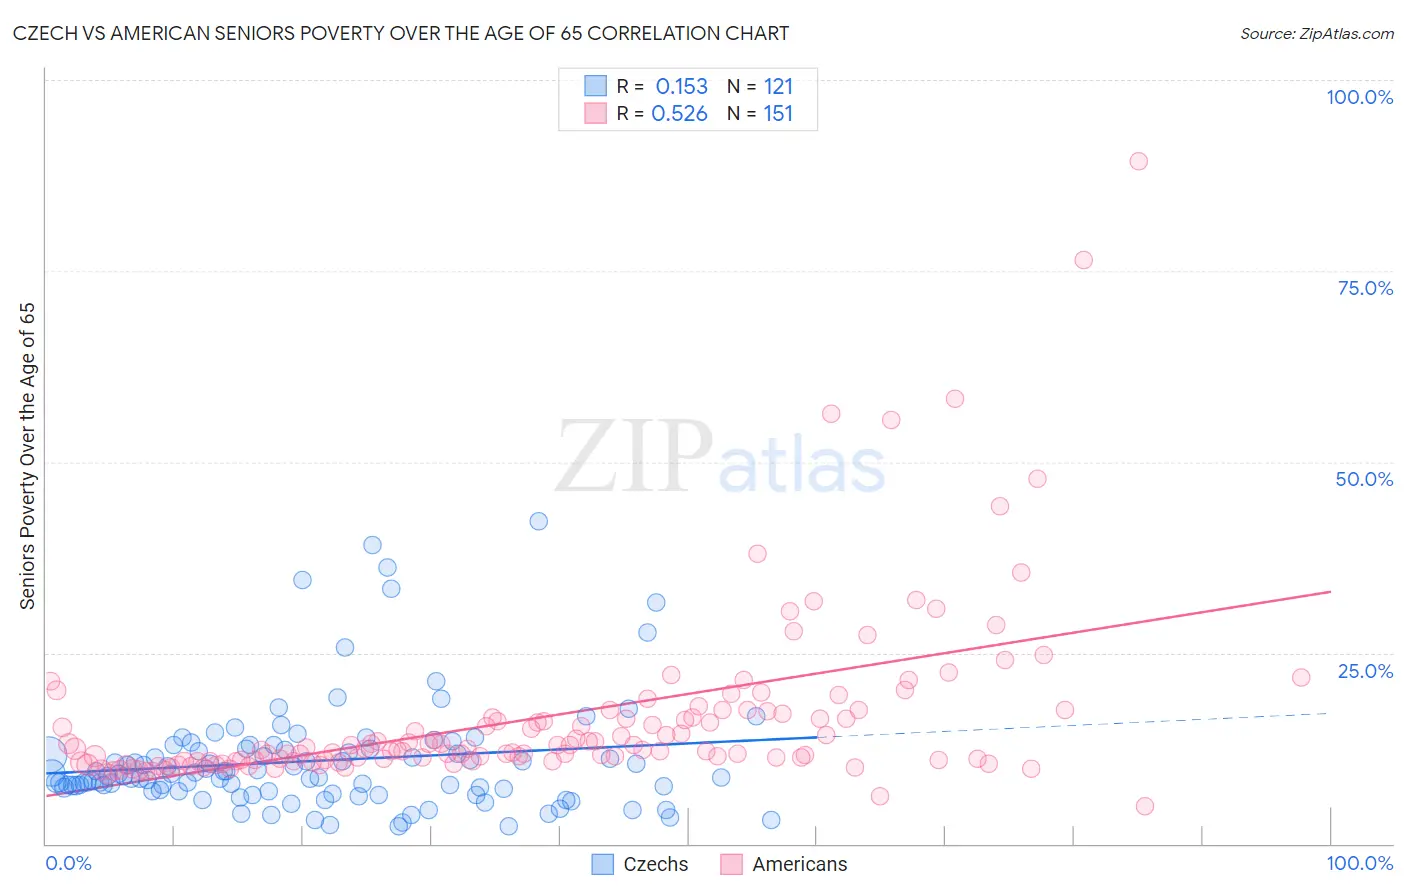 Czech vs American Seniors Poverty Over the Age of 65